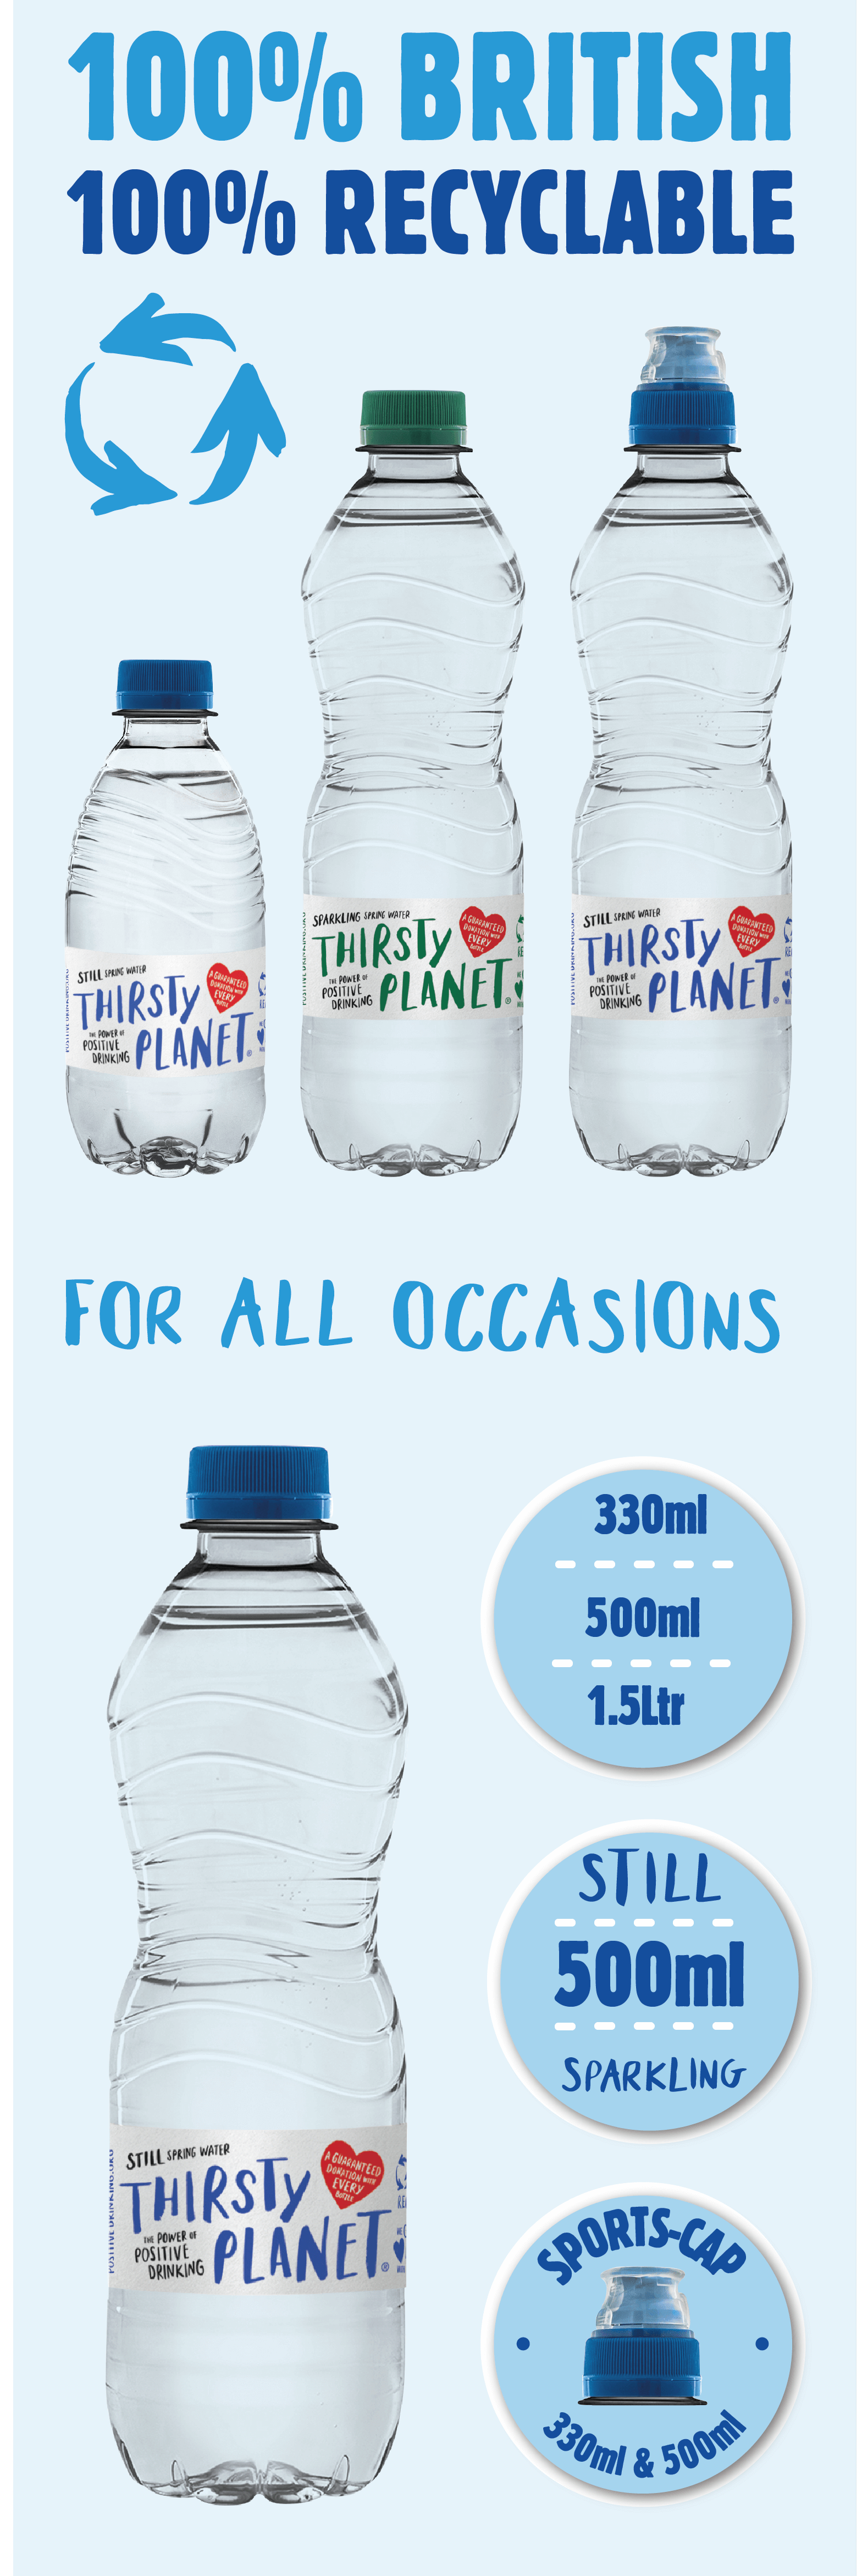 100% British. 100% Recyclable. For all occasions. 330ml, 500ml, 1.5Ltr. 500ml still / sparkling. Sports-Cap 330ml & 500ml.